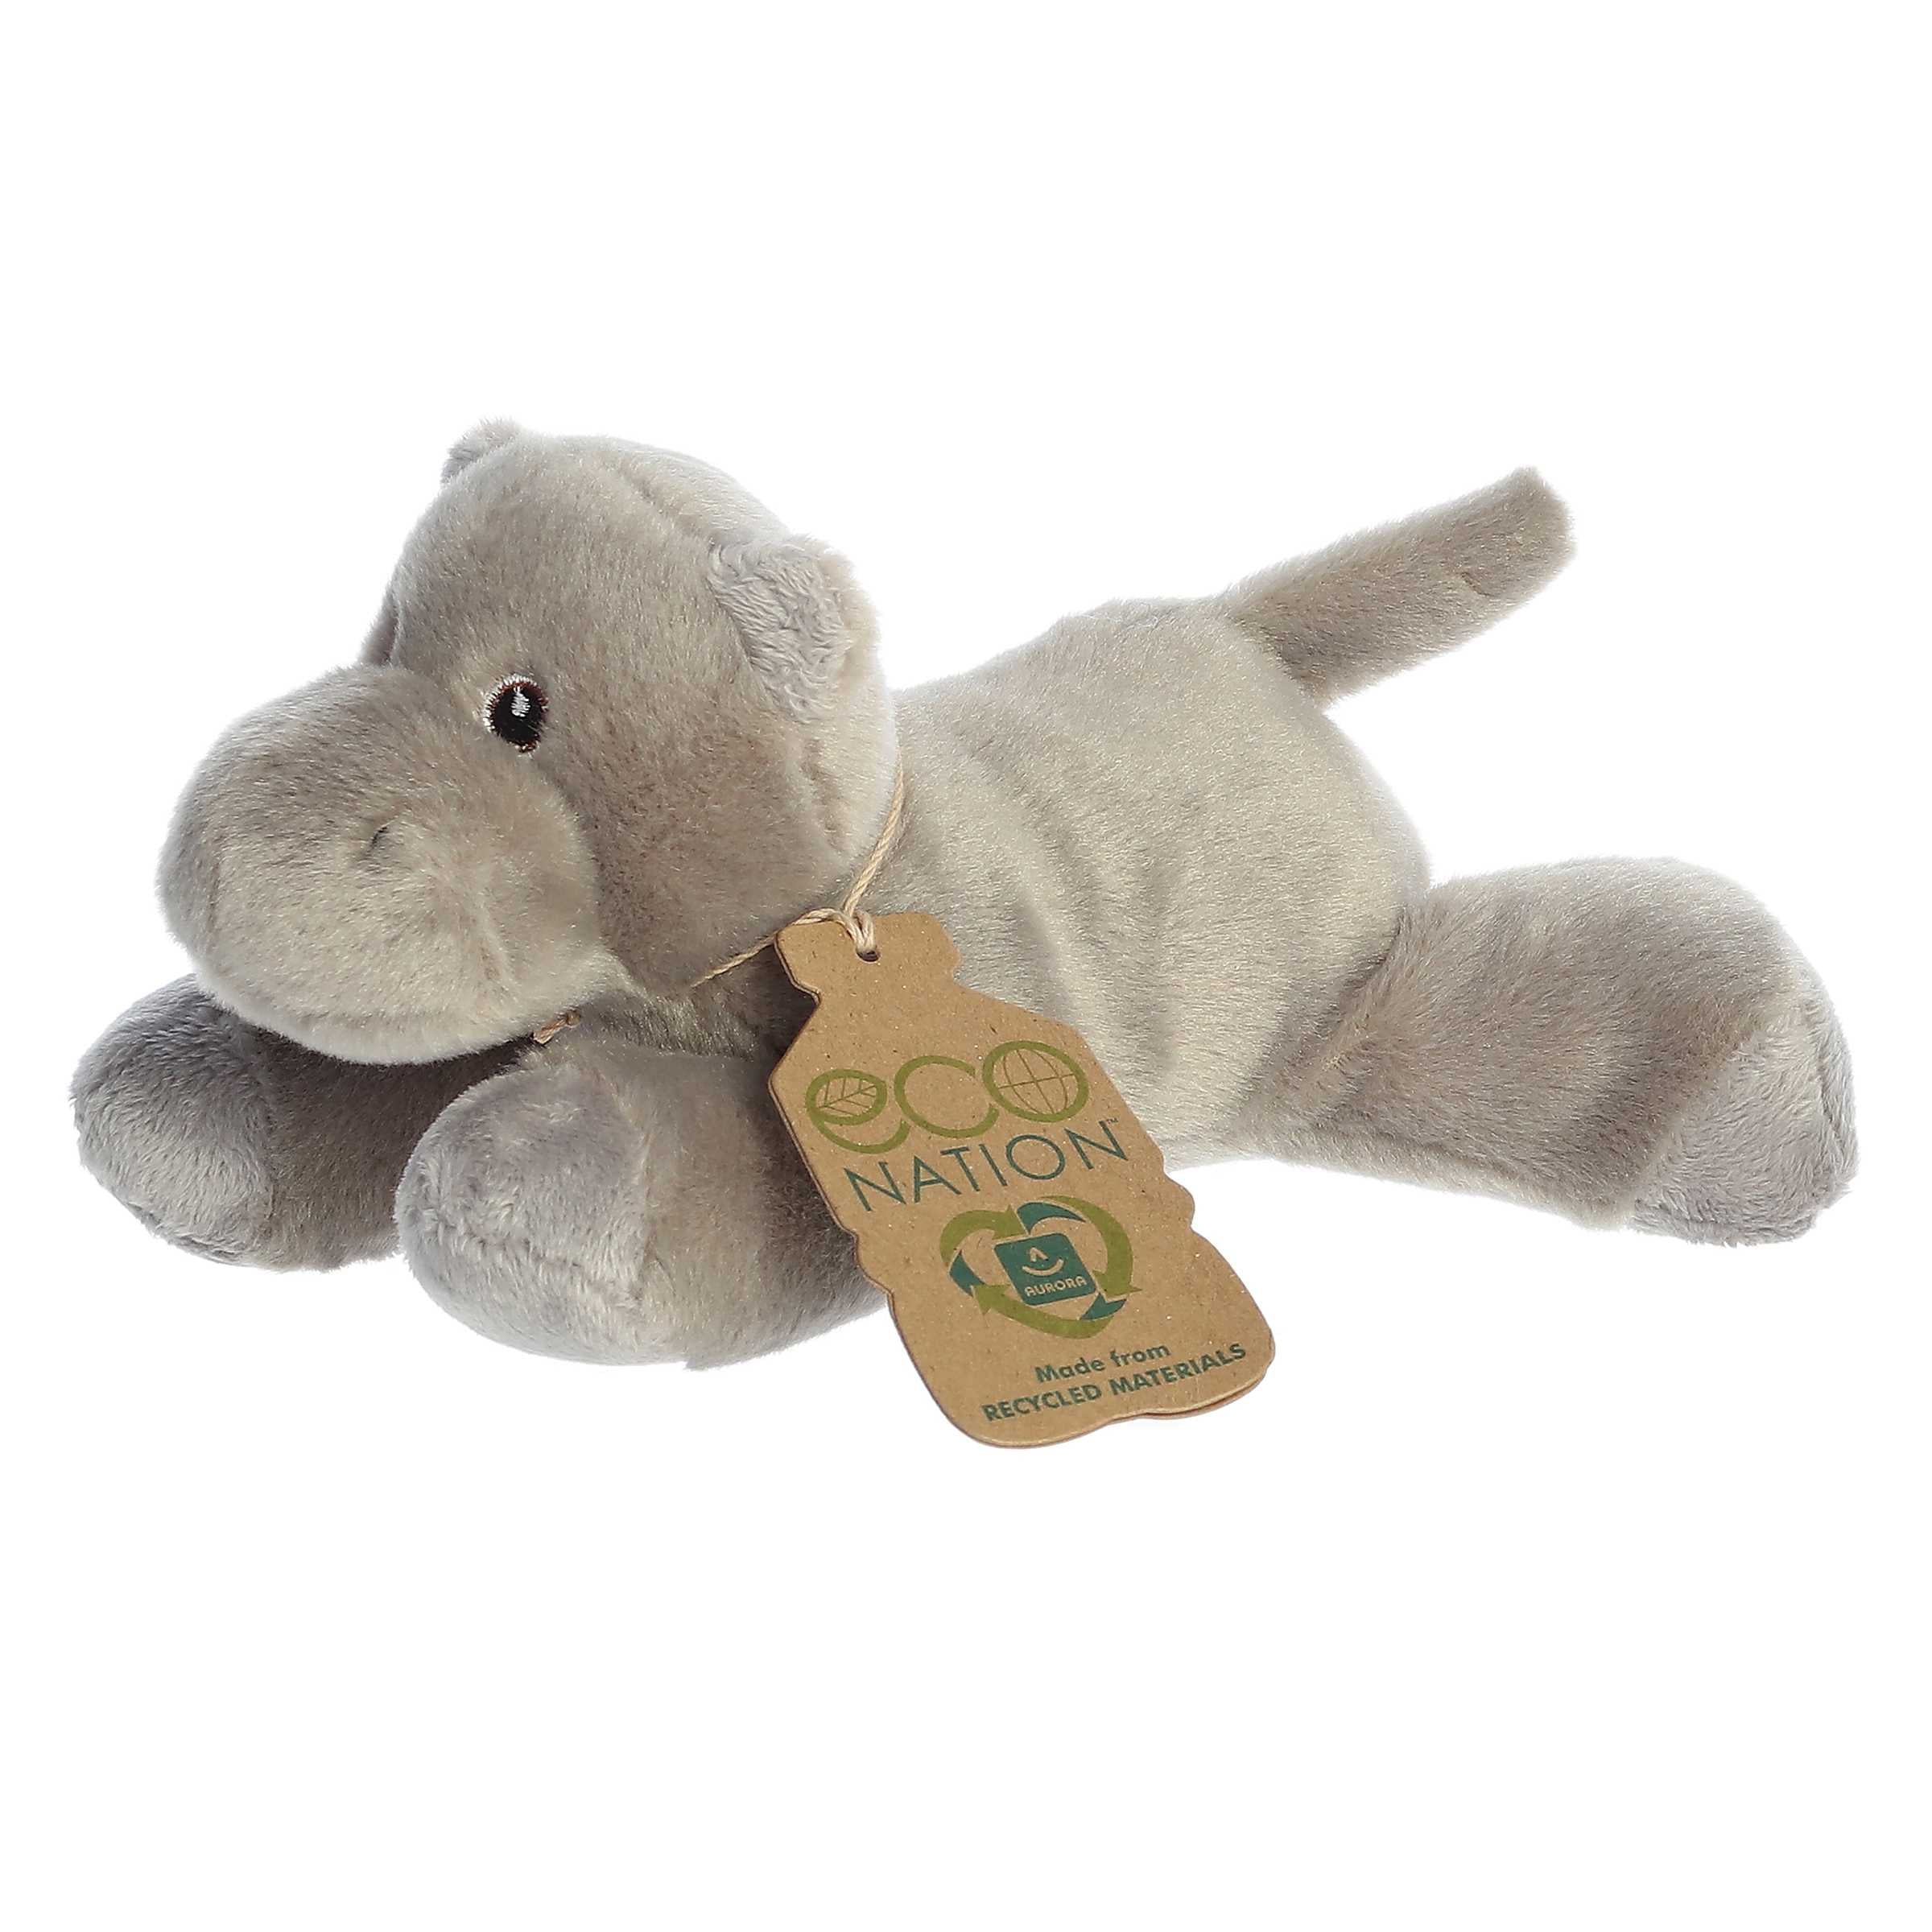 Eco Softie Hippo Plush, grey and soft, made from recycled plastic bottles, with 'Eco Nation' tag around its neck.